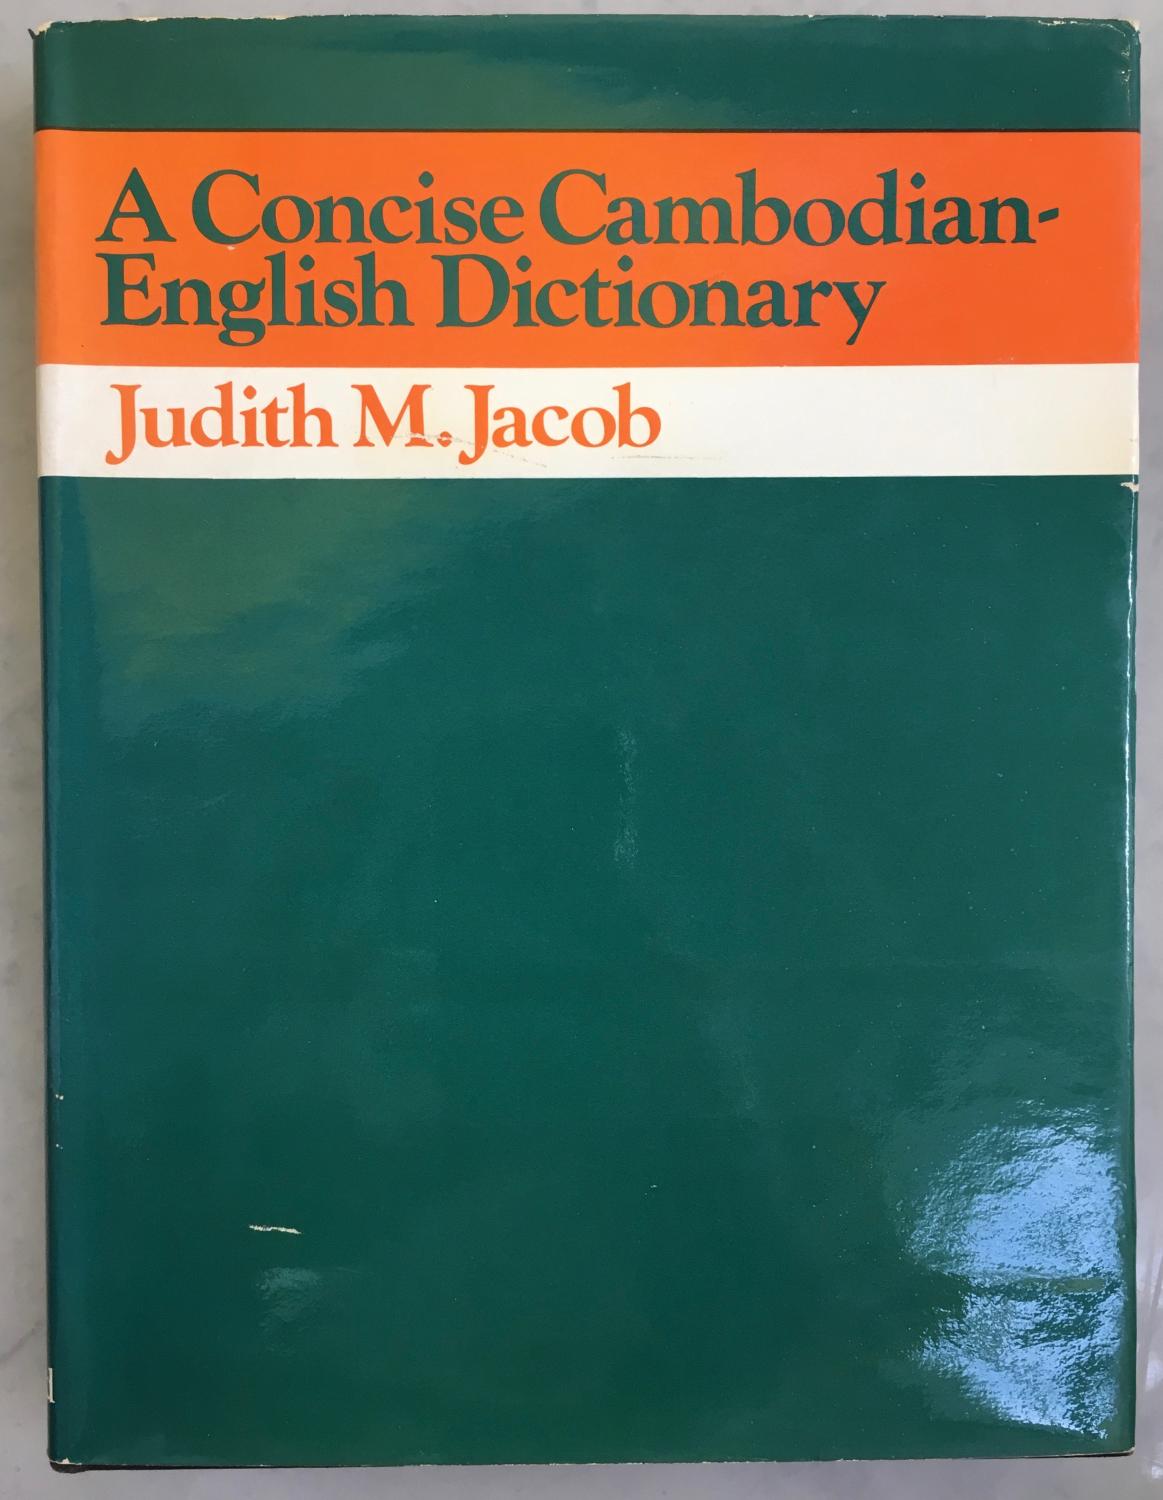 A Concise Cambodian-English Dictionary (School of Oriental & African Studies) - Judith Jacob